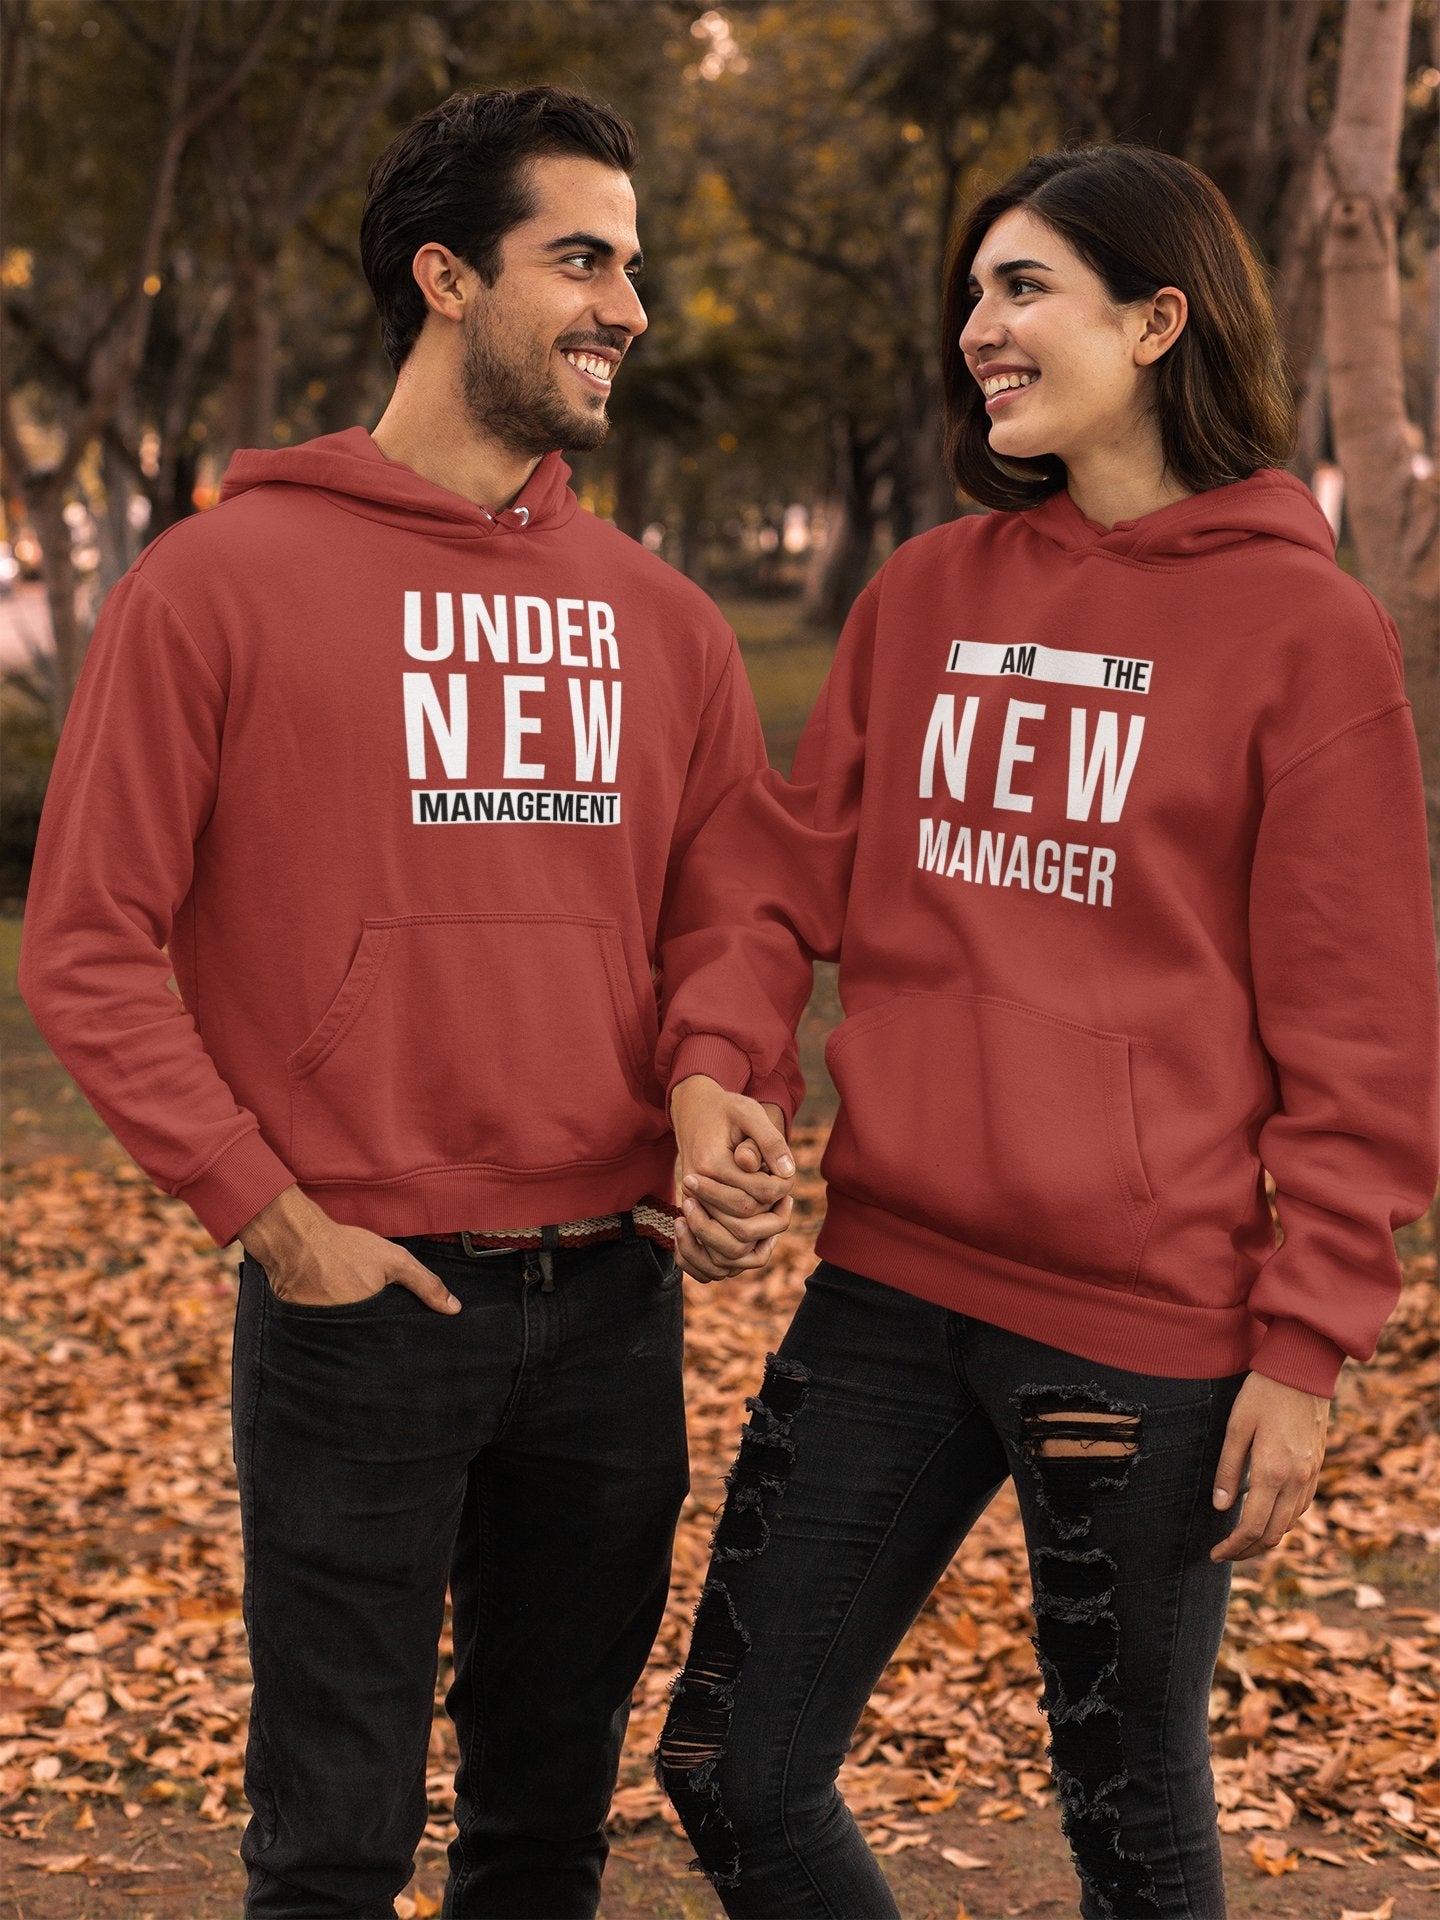 Under New Management Couple Hoodie-FunkyTradition - Funky Tees Club